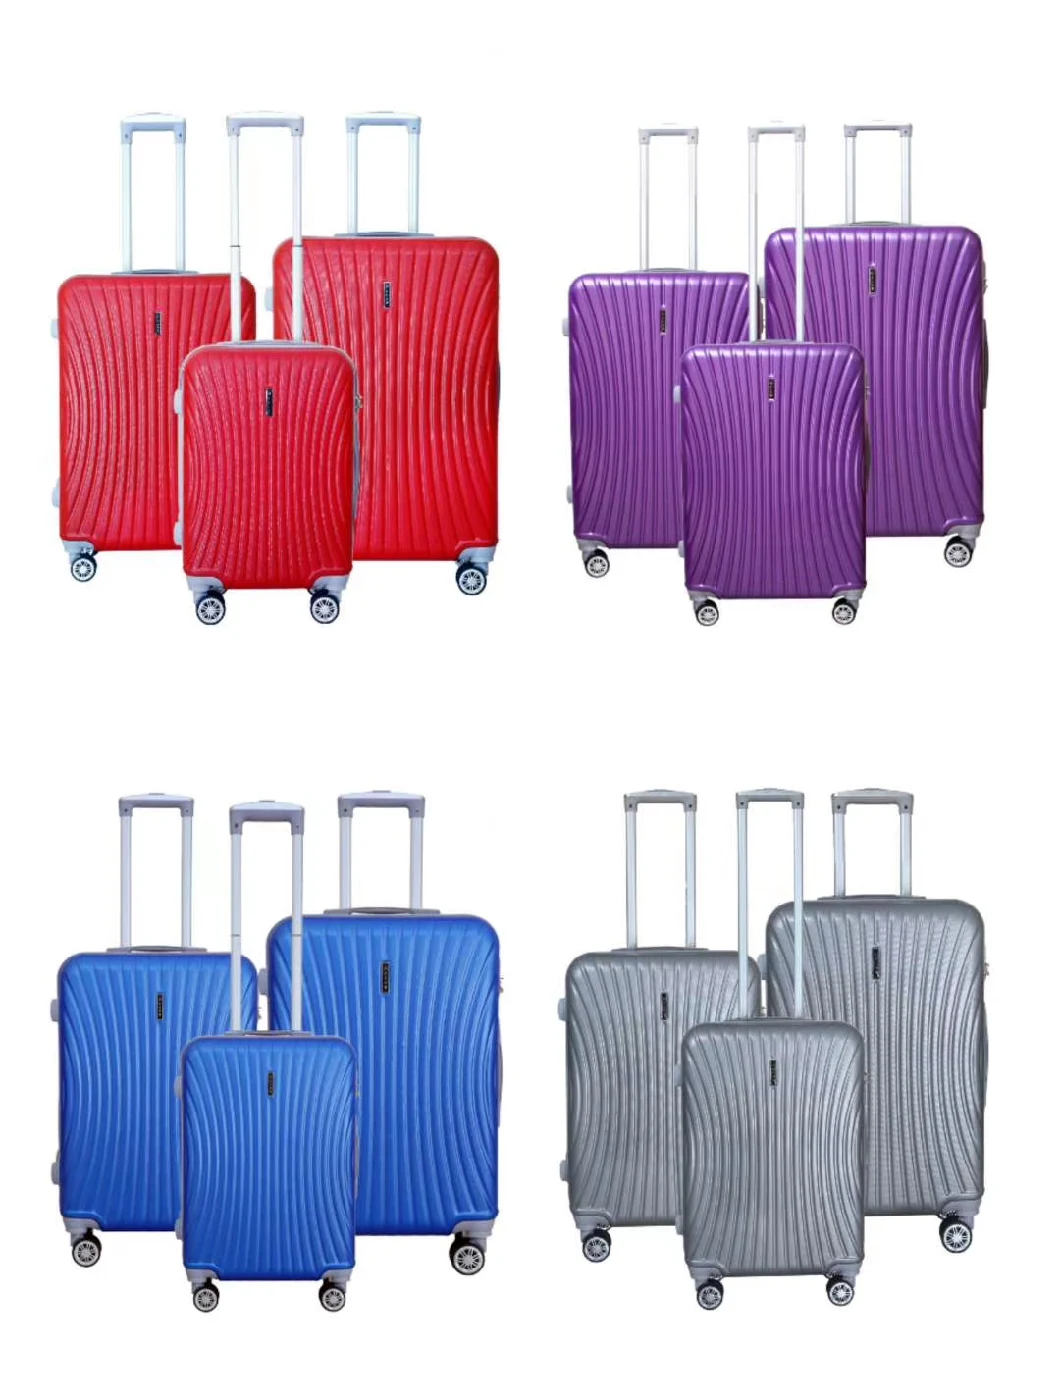 ABS Airport Suitcase Cover Luggage Making Plastic Sheet Extruder Machine